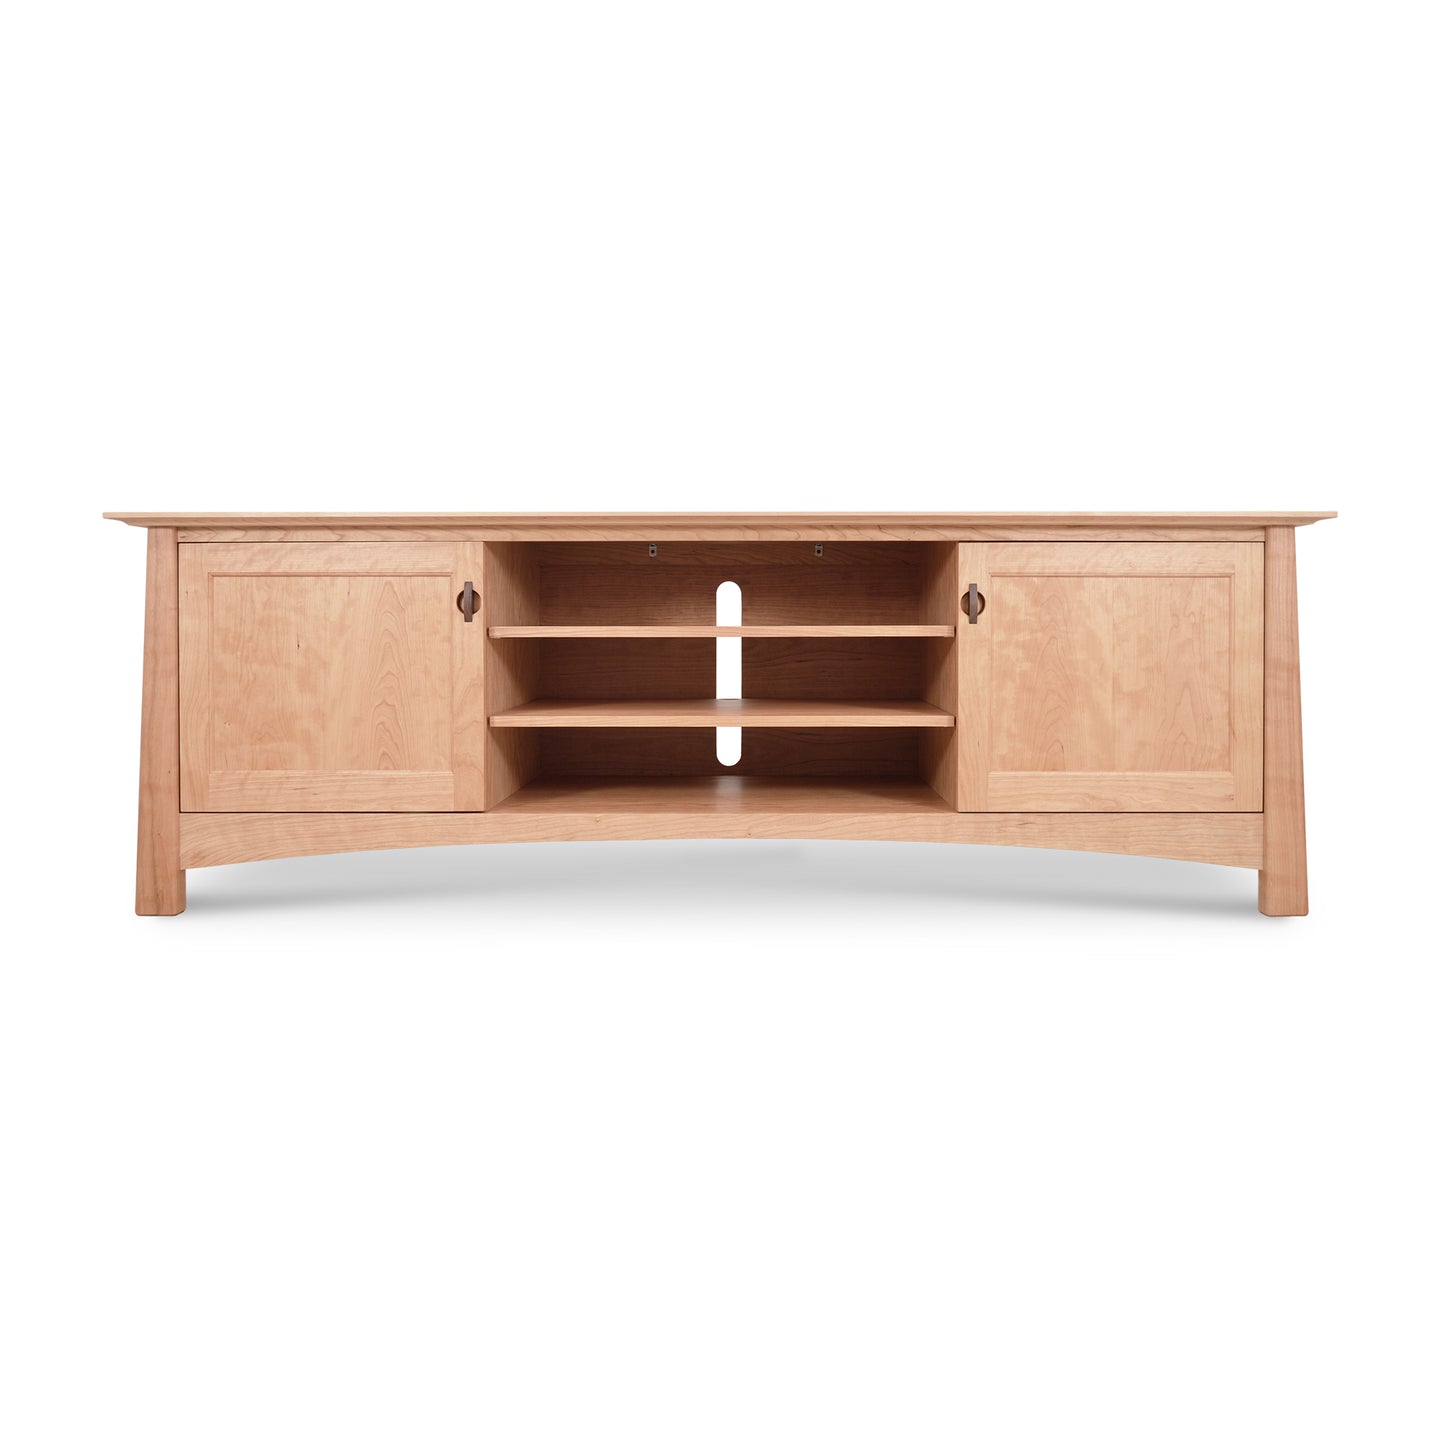 A long, curved wooden Maple Corner Woodworks Cherry Moon 80" TV-Media Console with a light natural finish. It features three sections: a central area with two shelves designed for a flat-screen TV and flanking cabinets on each side.